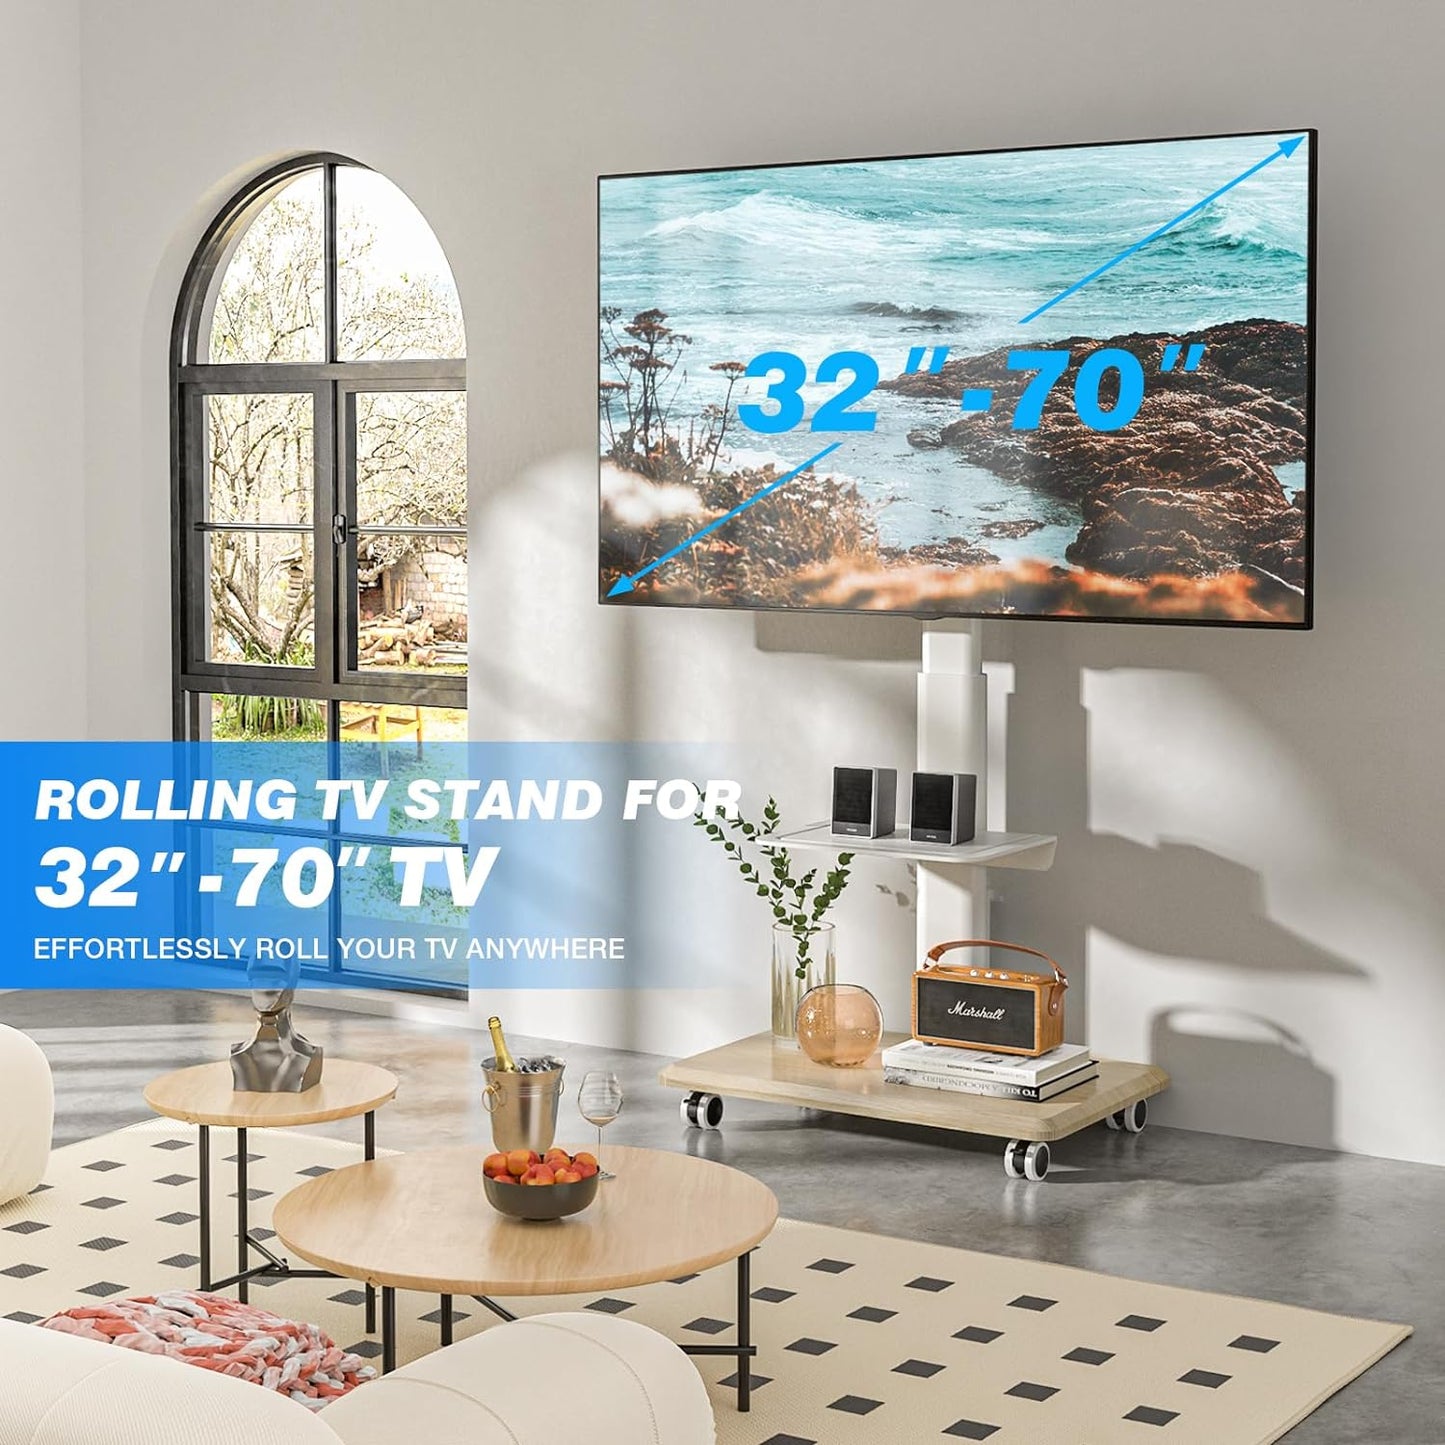 Sleek Rolling TV Stand with Power Outlet for Home Decor, Height Adjustable Portable TV Stand on Wheels for 32-70 Inch TVs, Strong Tall Mobile TV Cart with Mount Up to 88 lbs, White